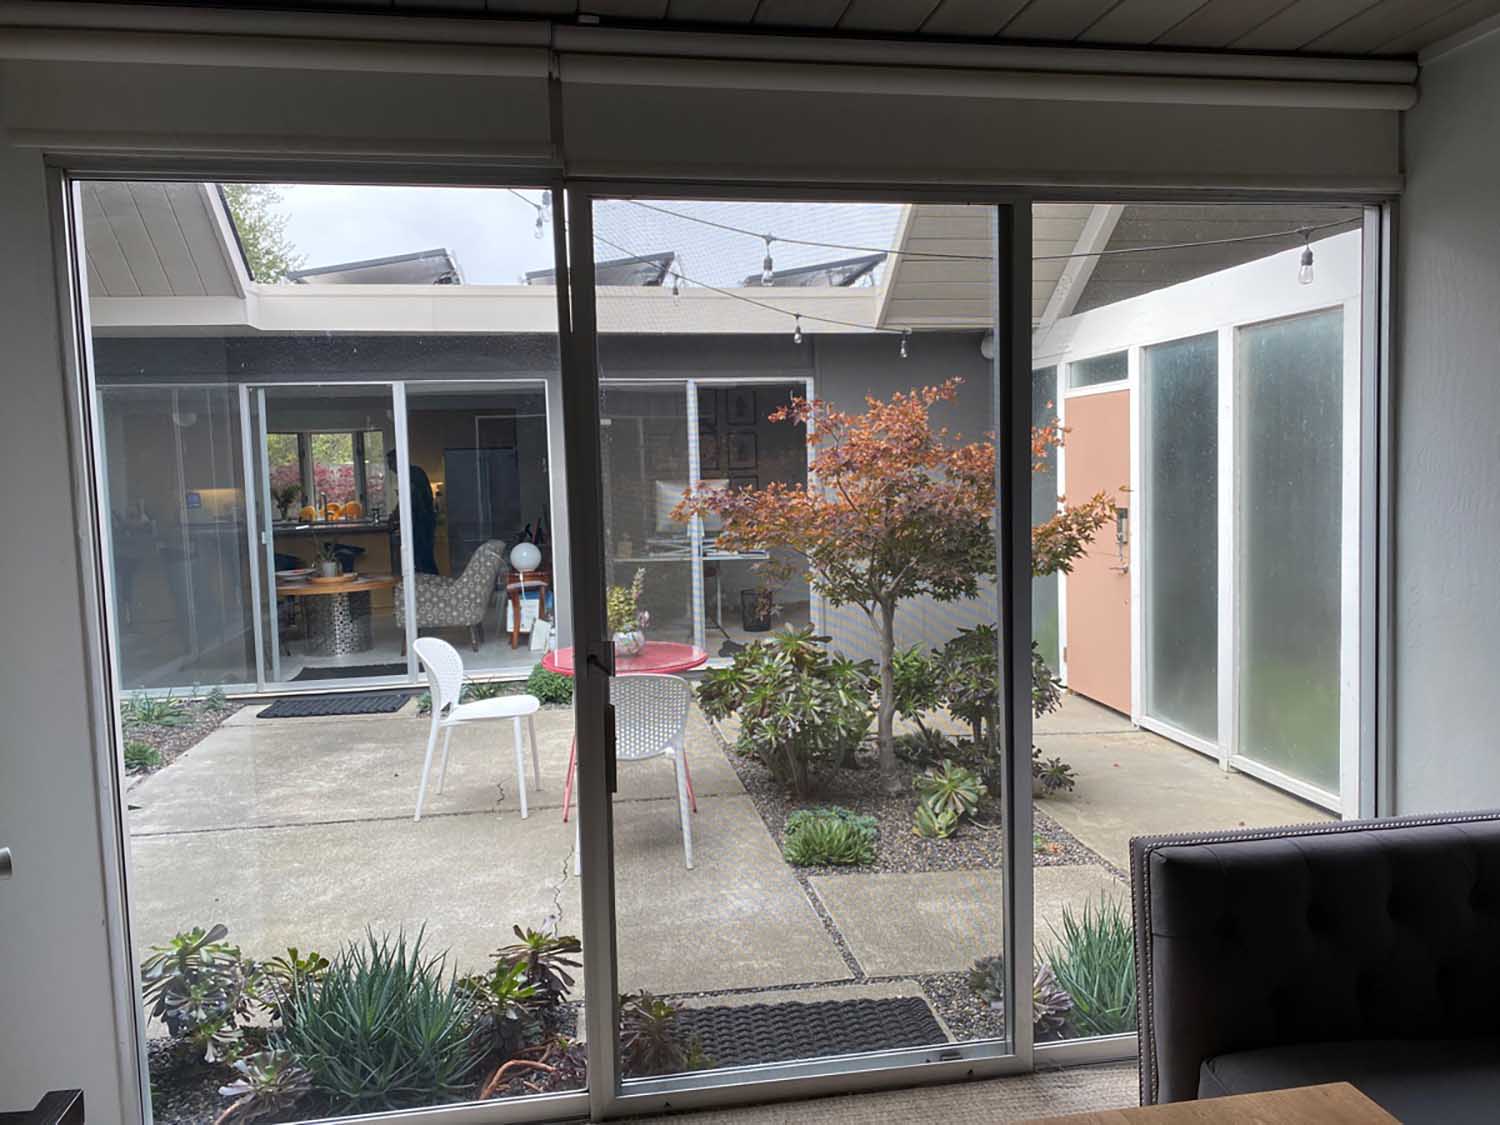 A lovely San Rafael, CA home transformed with 3M Prestige 70 Window Film by ClimatePro.